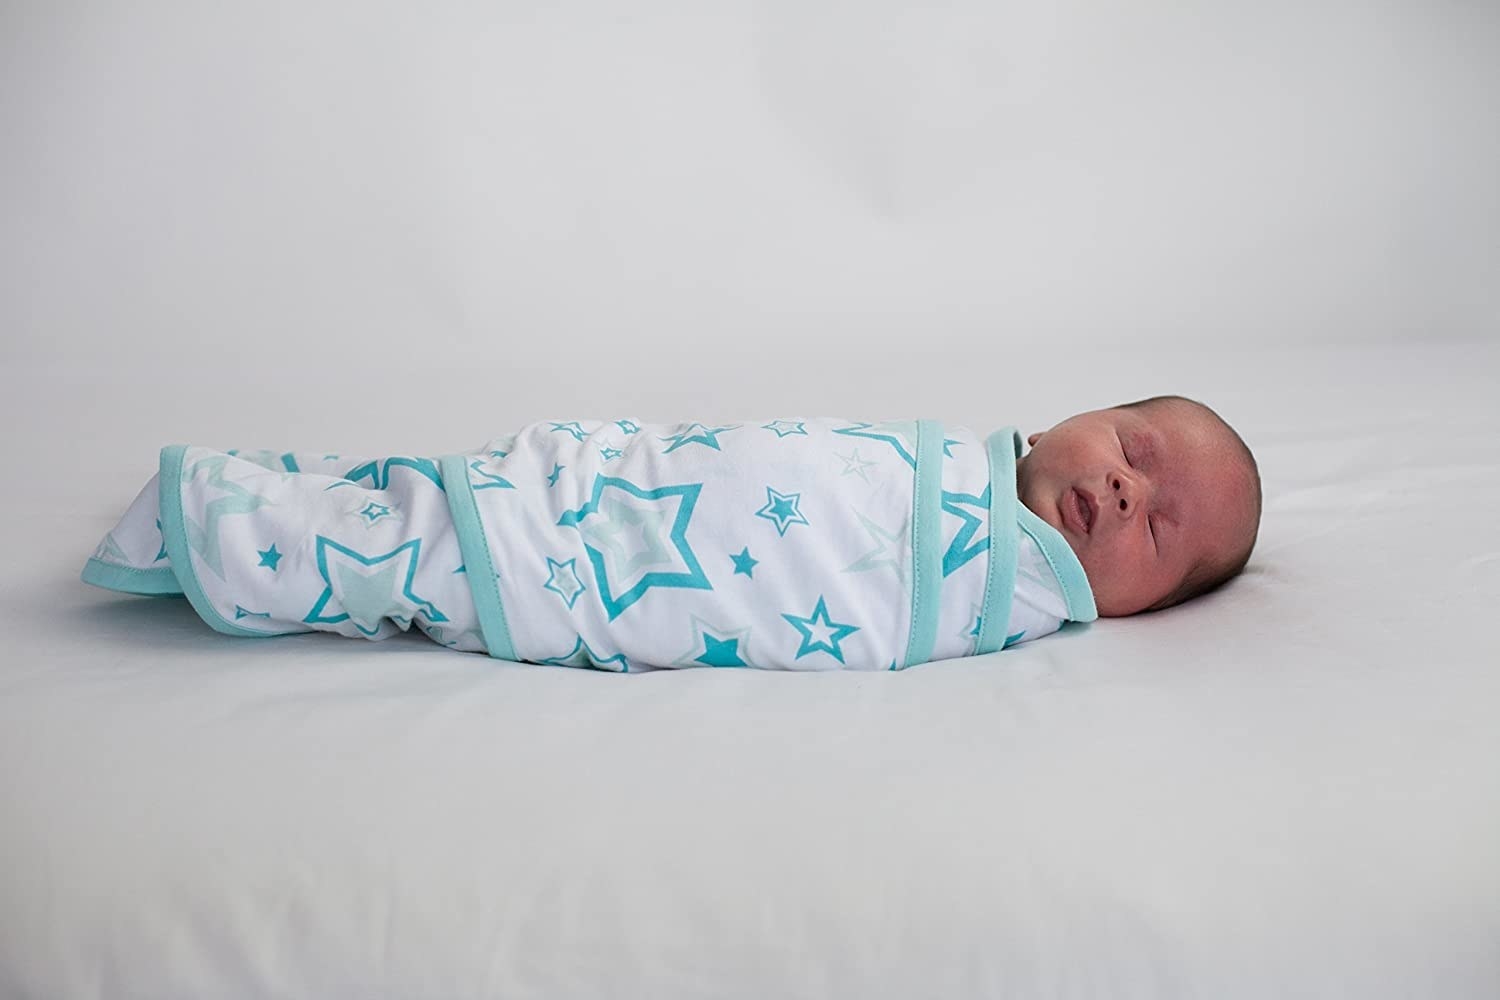 A baby model swaddled in a white wrap with teal accents and stars